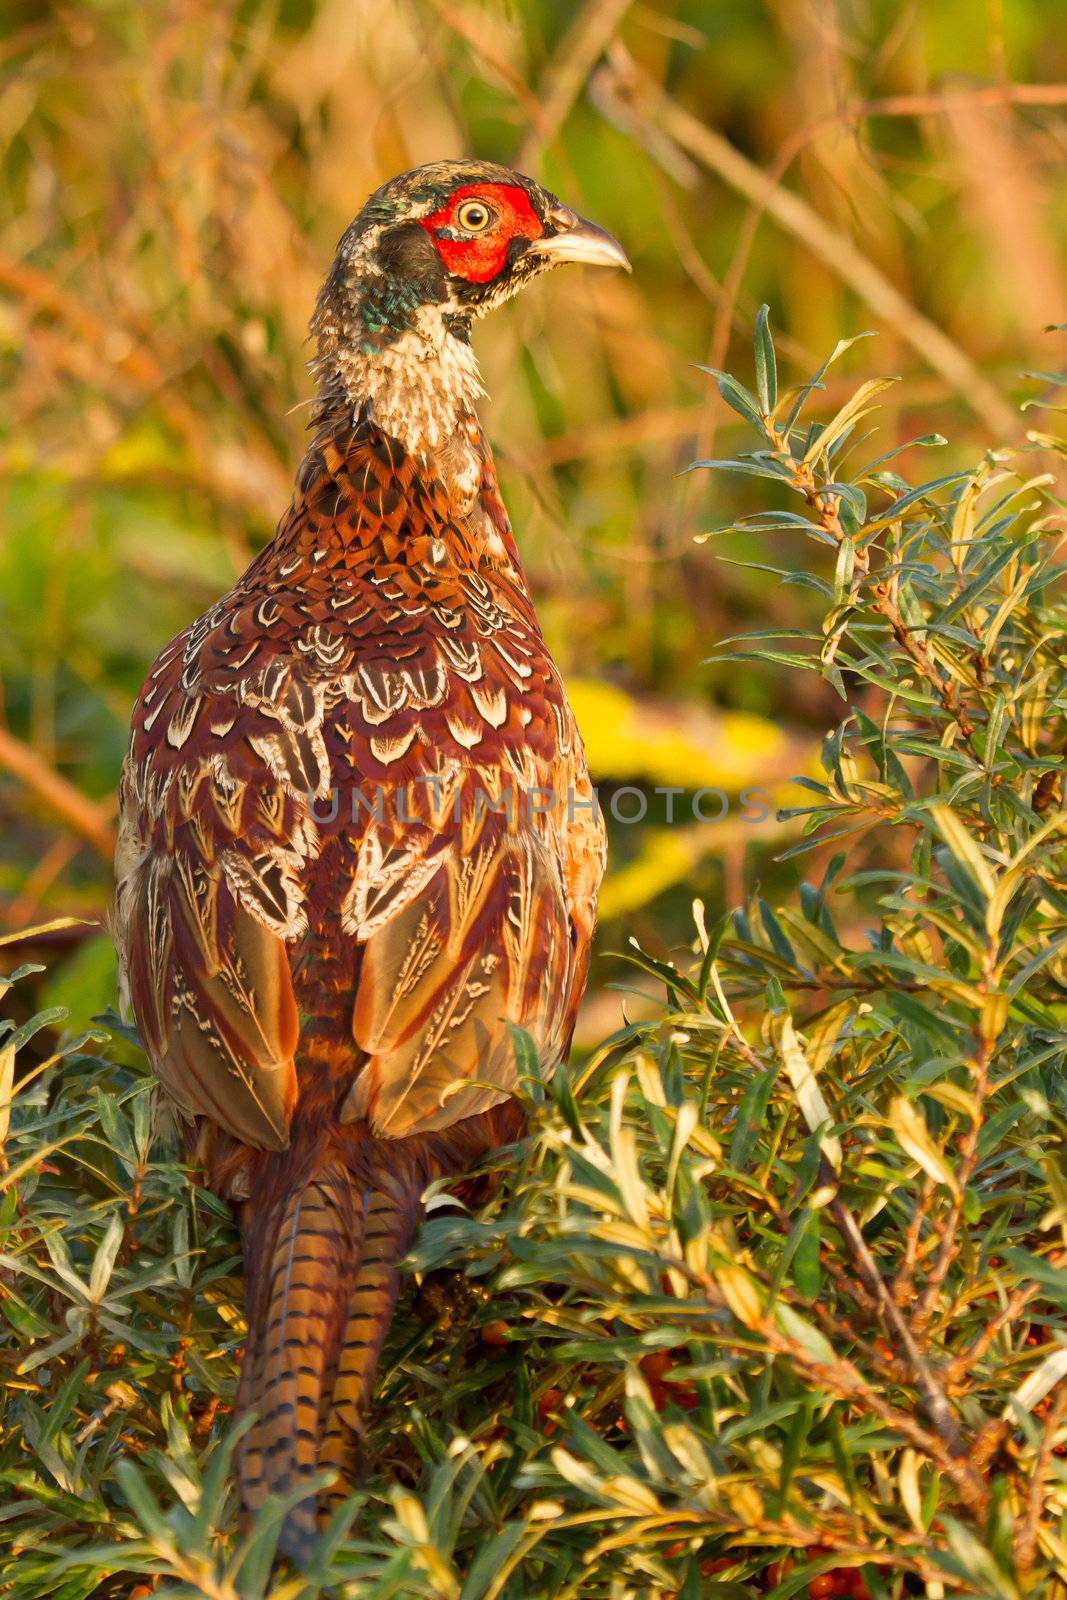 A pheasant by michaklootwijk